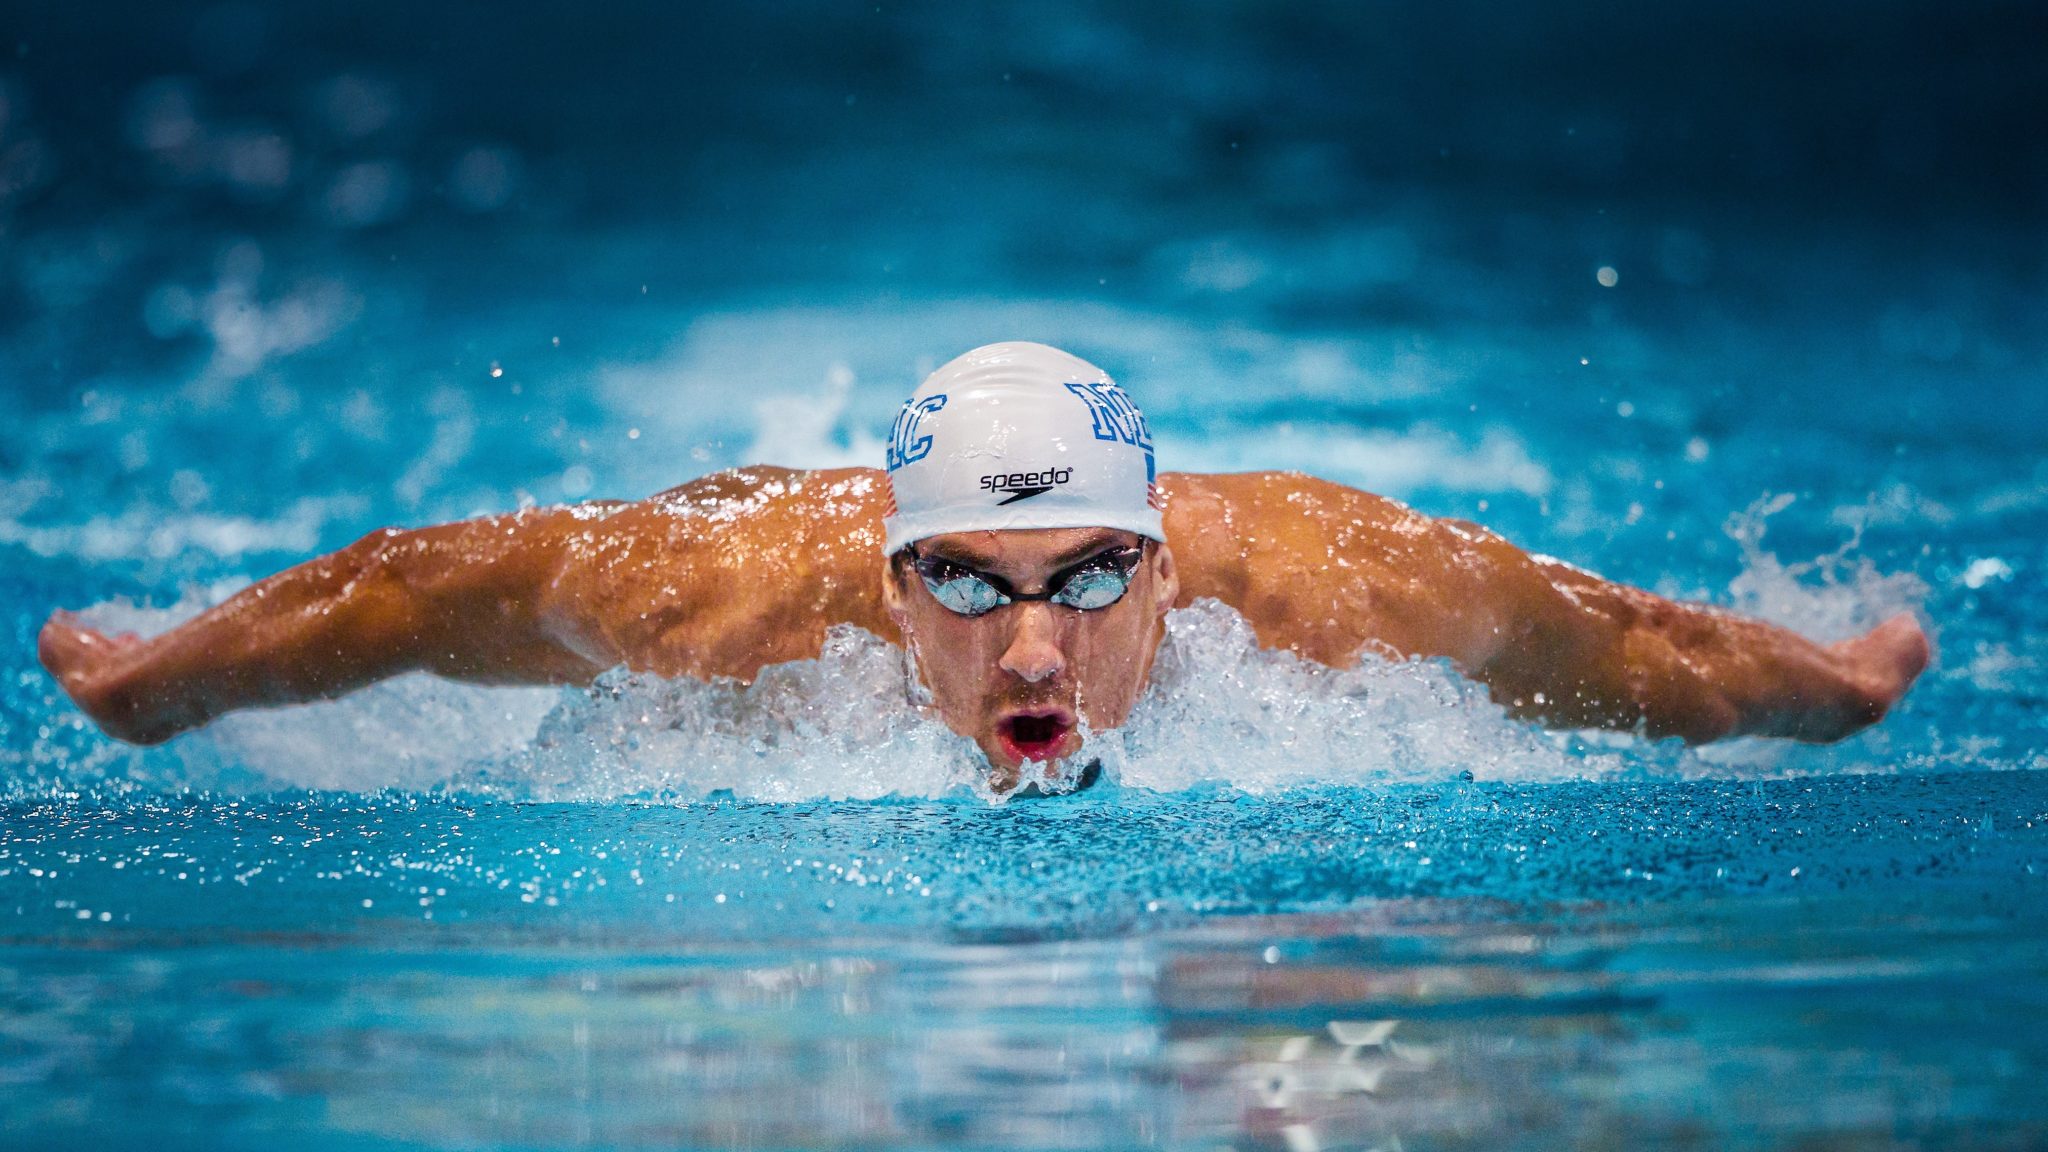 FINA Names Franklin, Phelps World Swimmers of the Year